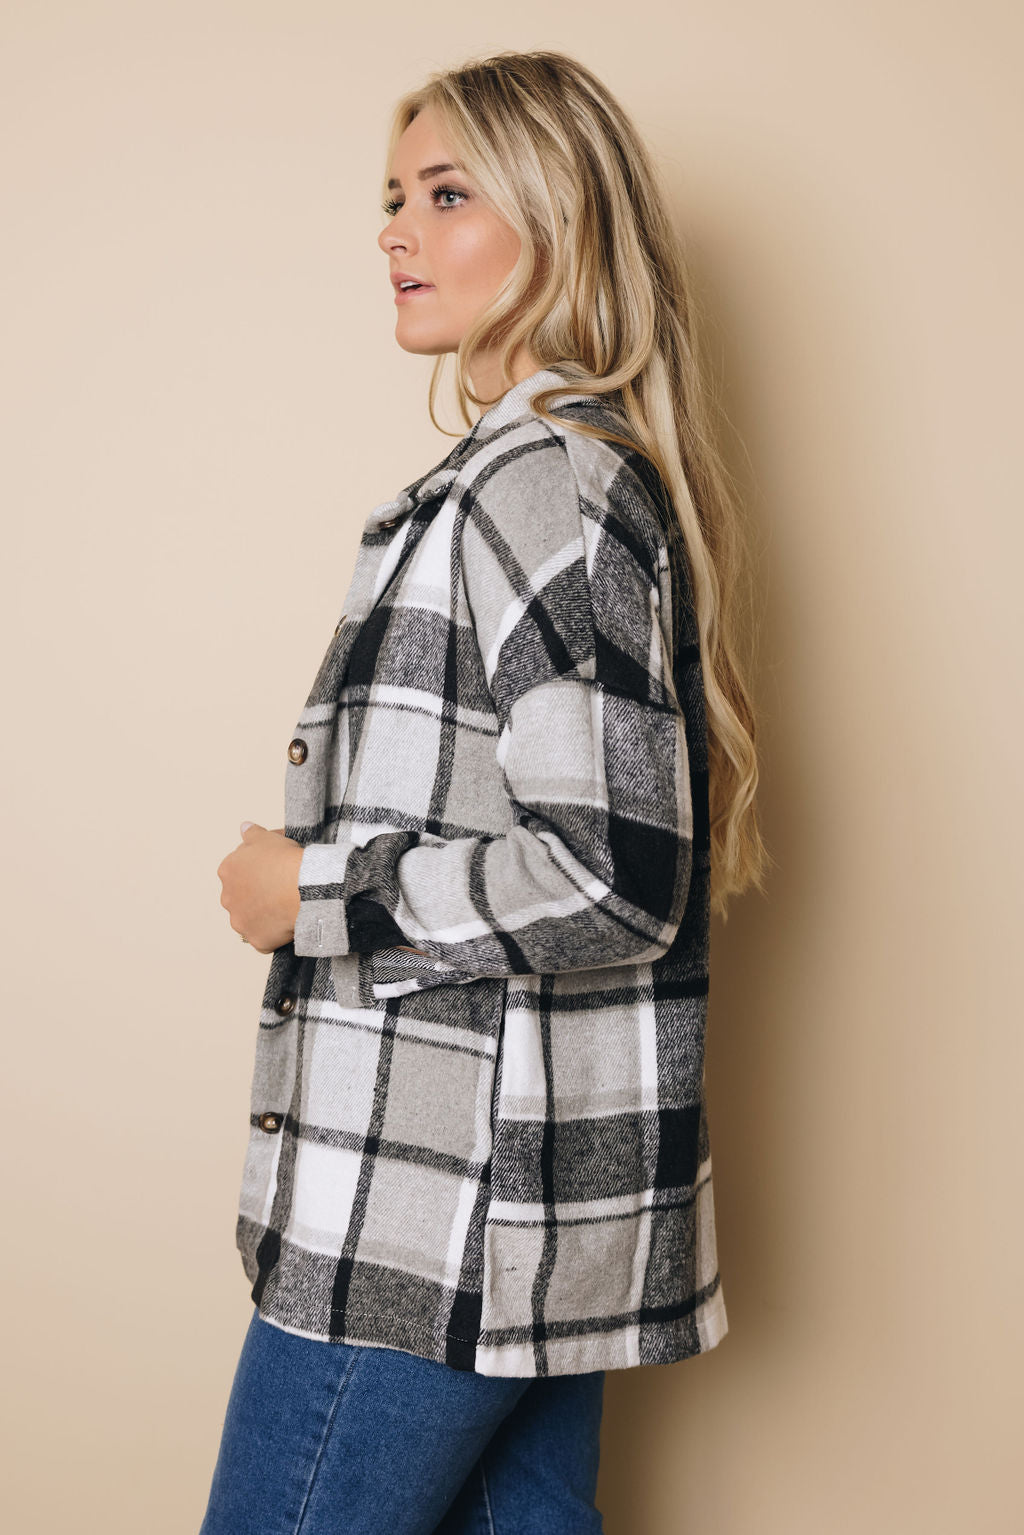 Speak Now Plaid Buttoned Shirt Jacket Stay Warm In Style